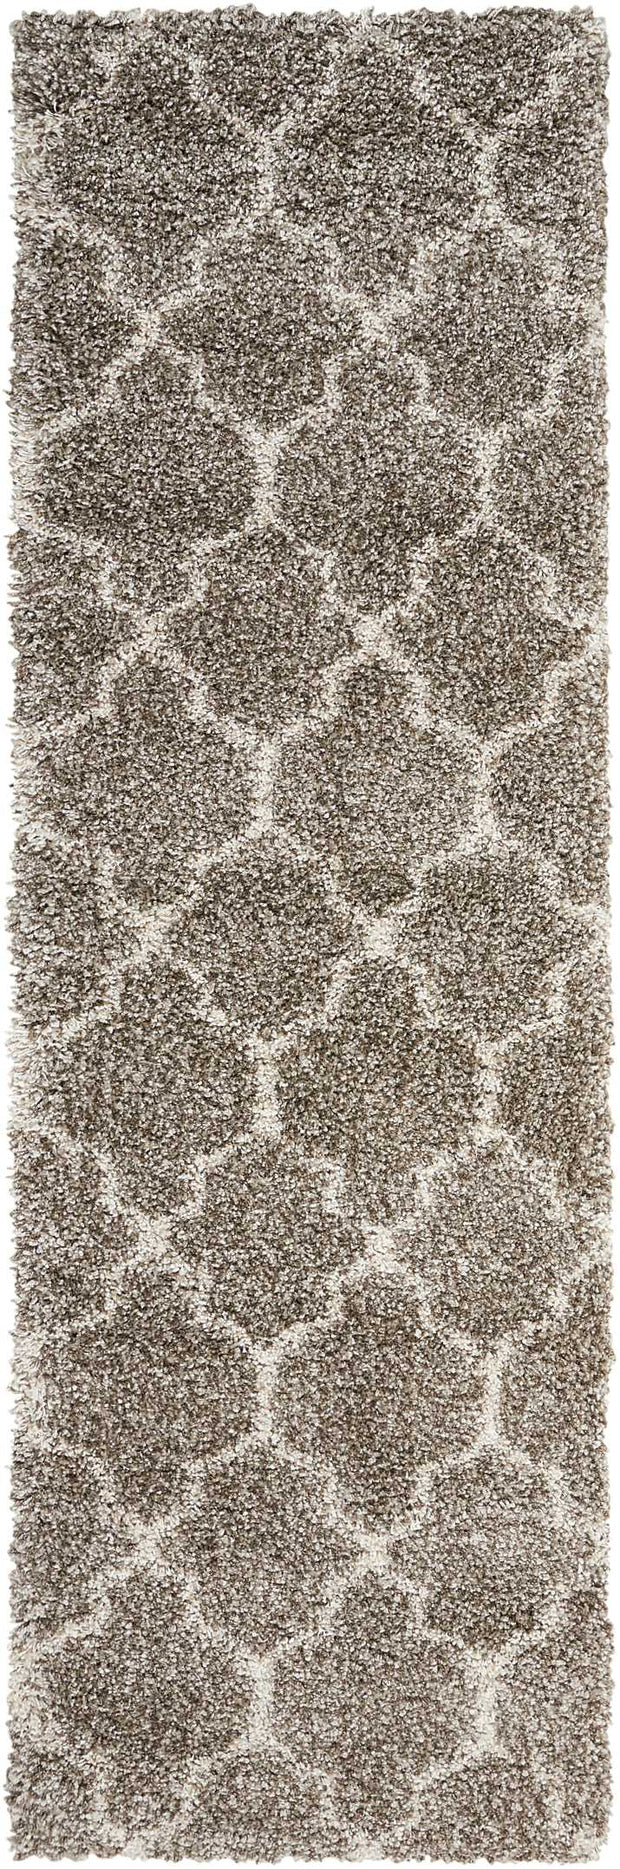 amore stone rug by nourison 99446320490 redo 3